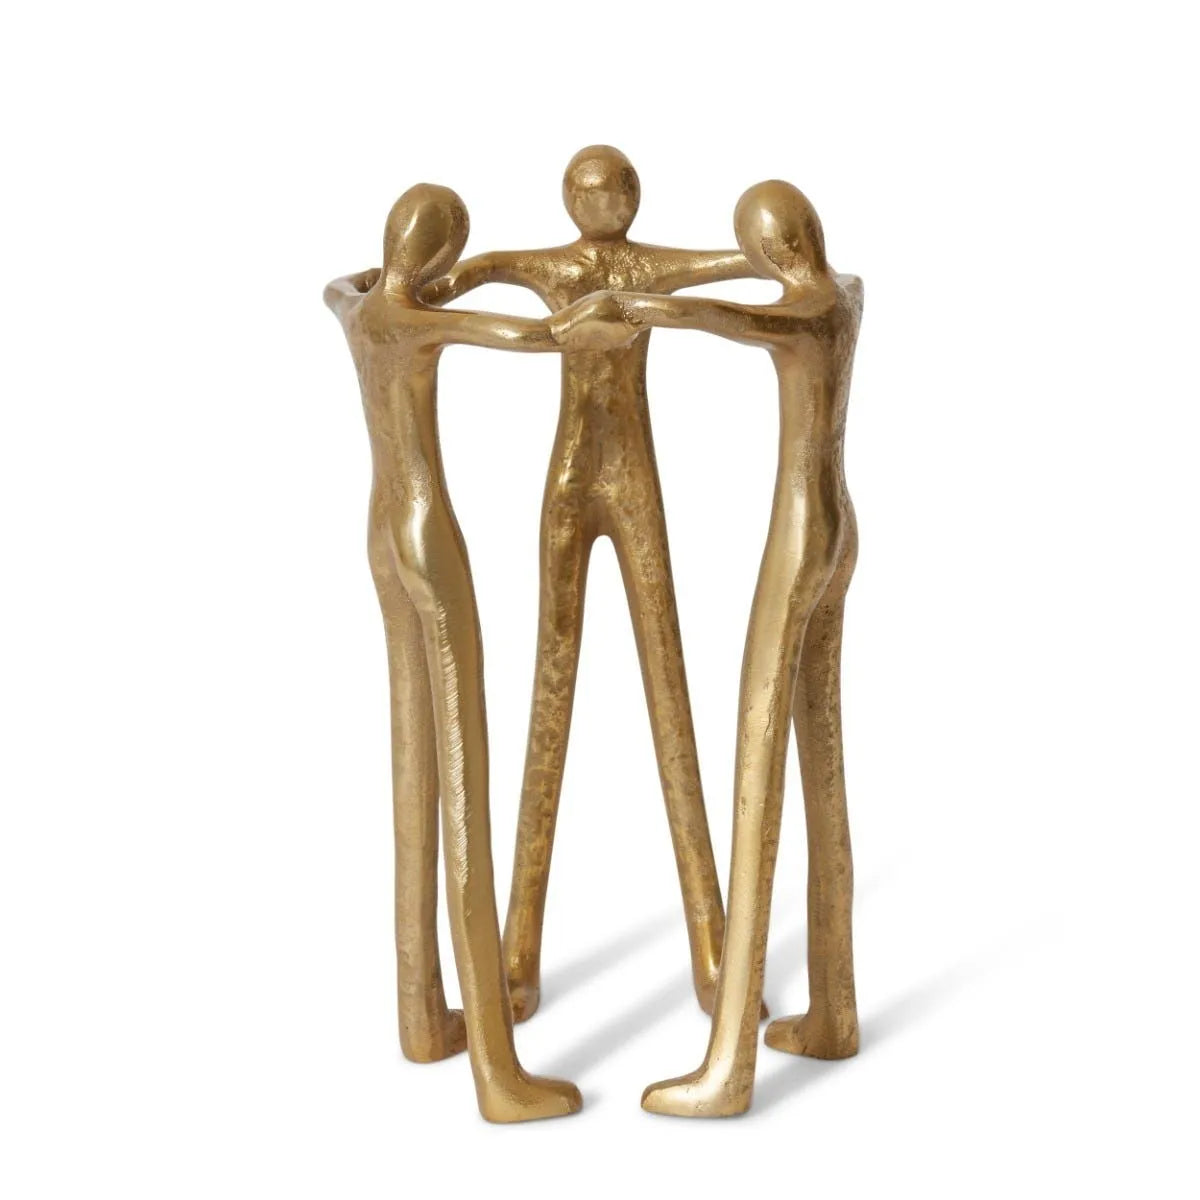 Our Friendship Sculpture Gold adds a truly special touch to any living space. Carefully crafted with high-quality gold aluminum, this unique design features three figures standing tall, their hands intertwined to create a perfect circle. Add sophistication and interest to your home with this captivating piece.